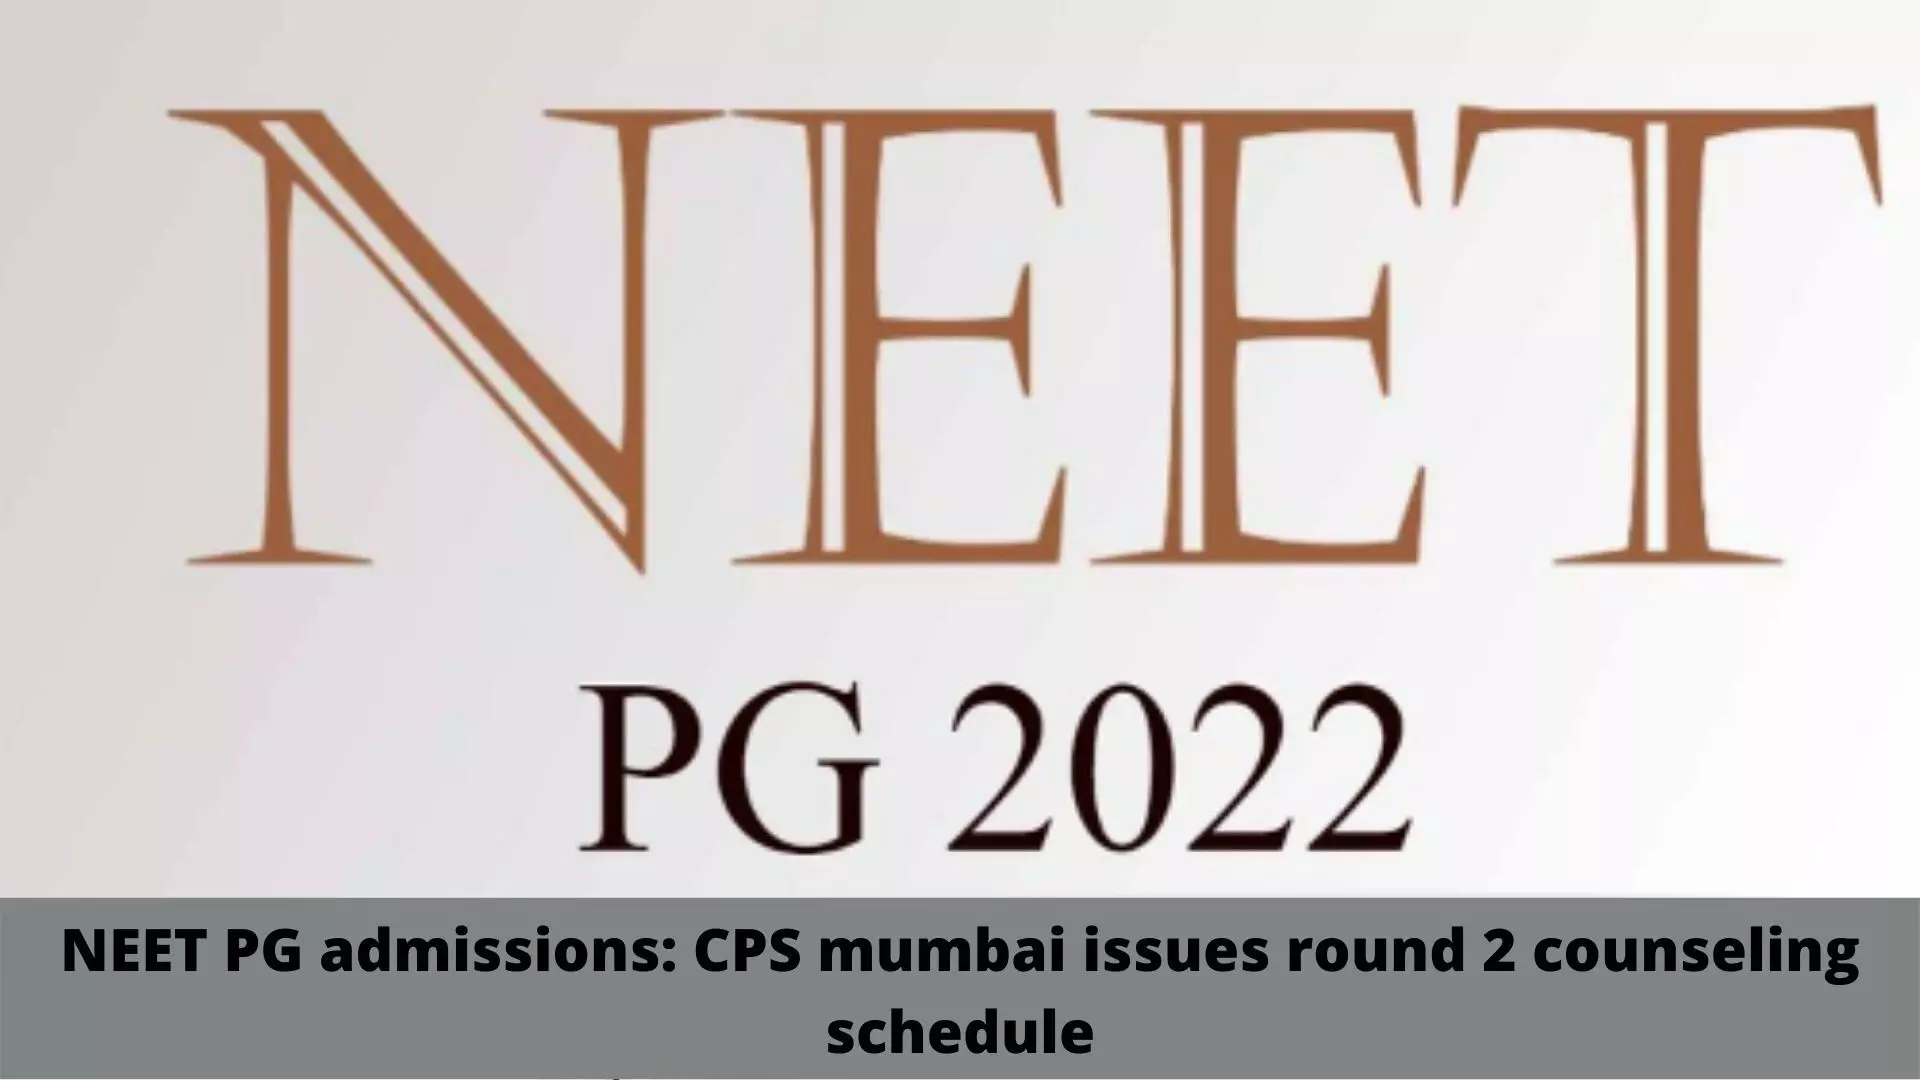 NEET PG admissions: CPS Mumbai issues round 2 counseling schedule